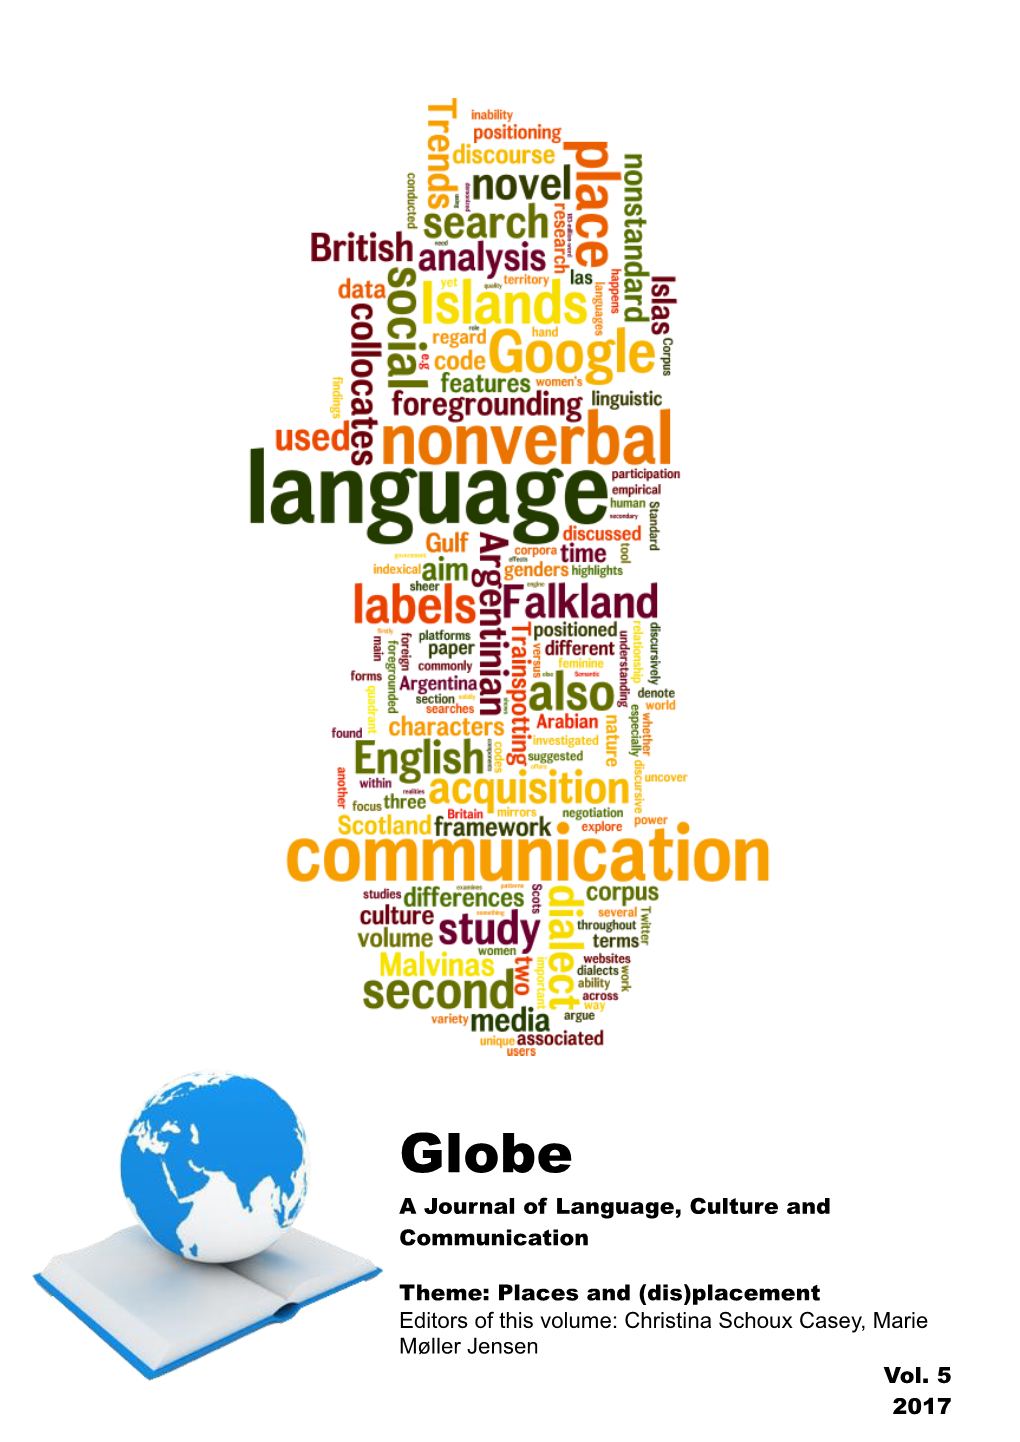 Globe a Journal of Language, Culture and Communication